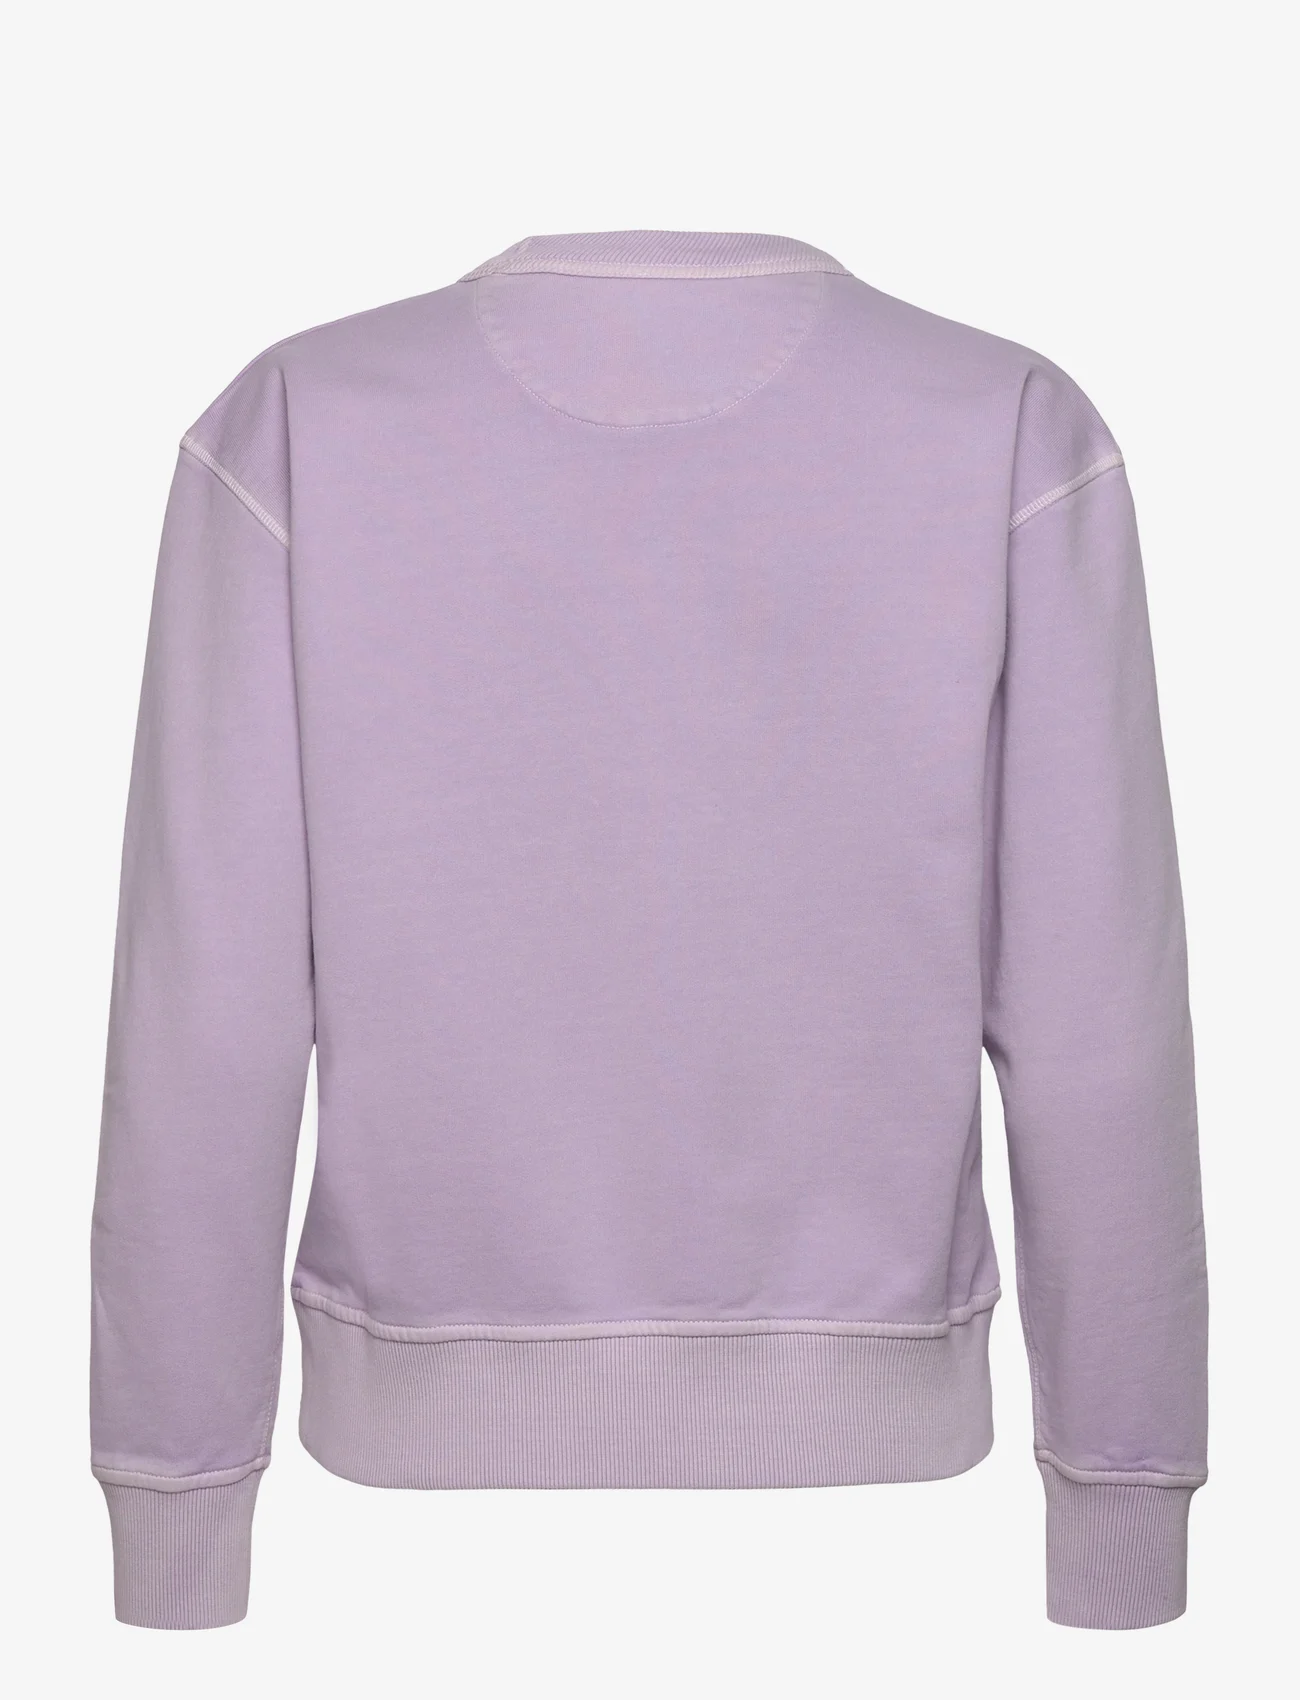 GANT - SUNFADED C-NECK SWEAT - women - soothing lilac - 1